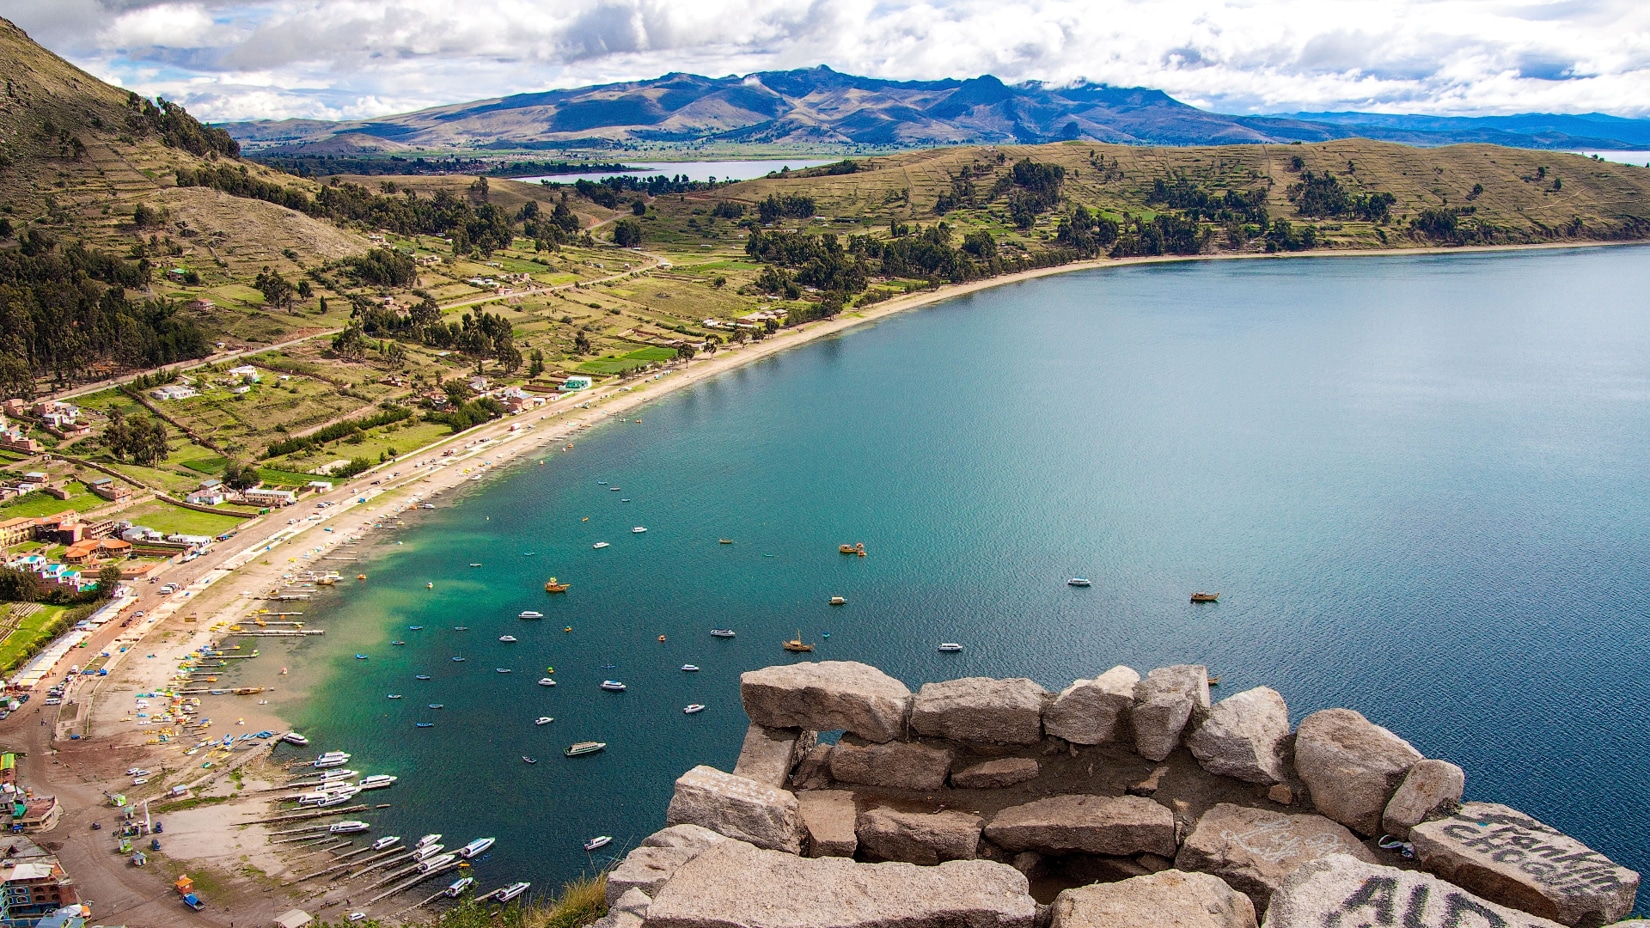 What are best best things to do in the city of Puno - Orange Nation